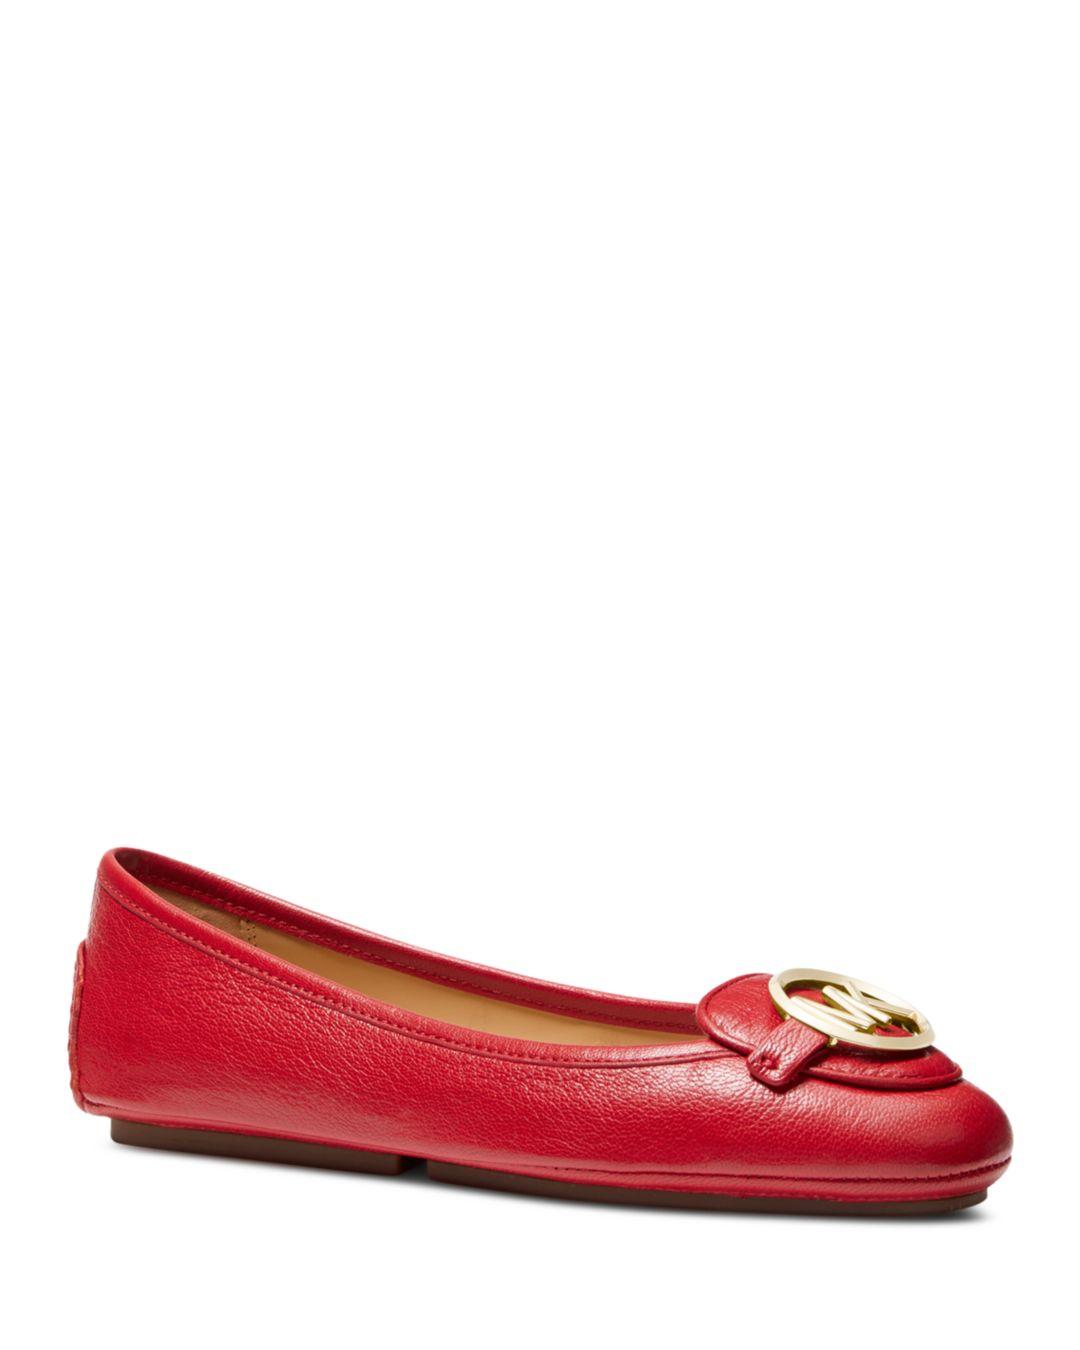 MICHAEL Michael Kors Women's Lillie Embellished Moccasin Flats in Red | Lyst